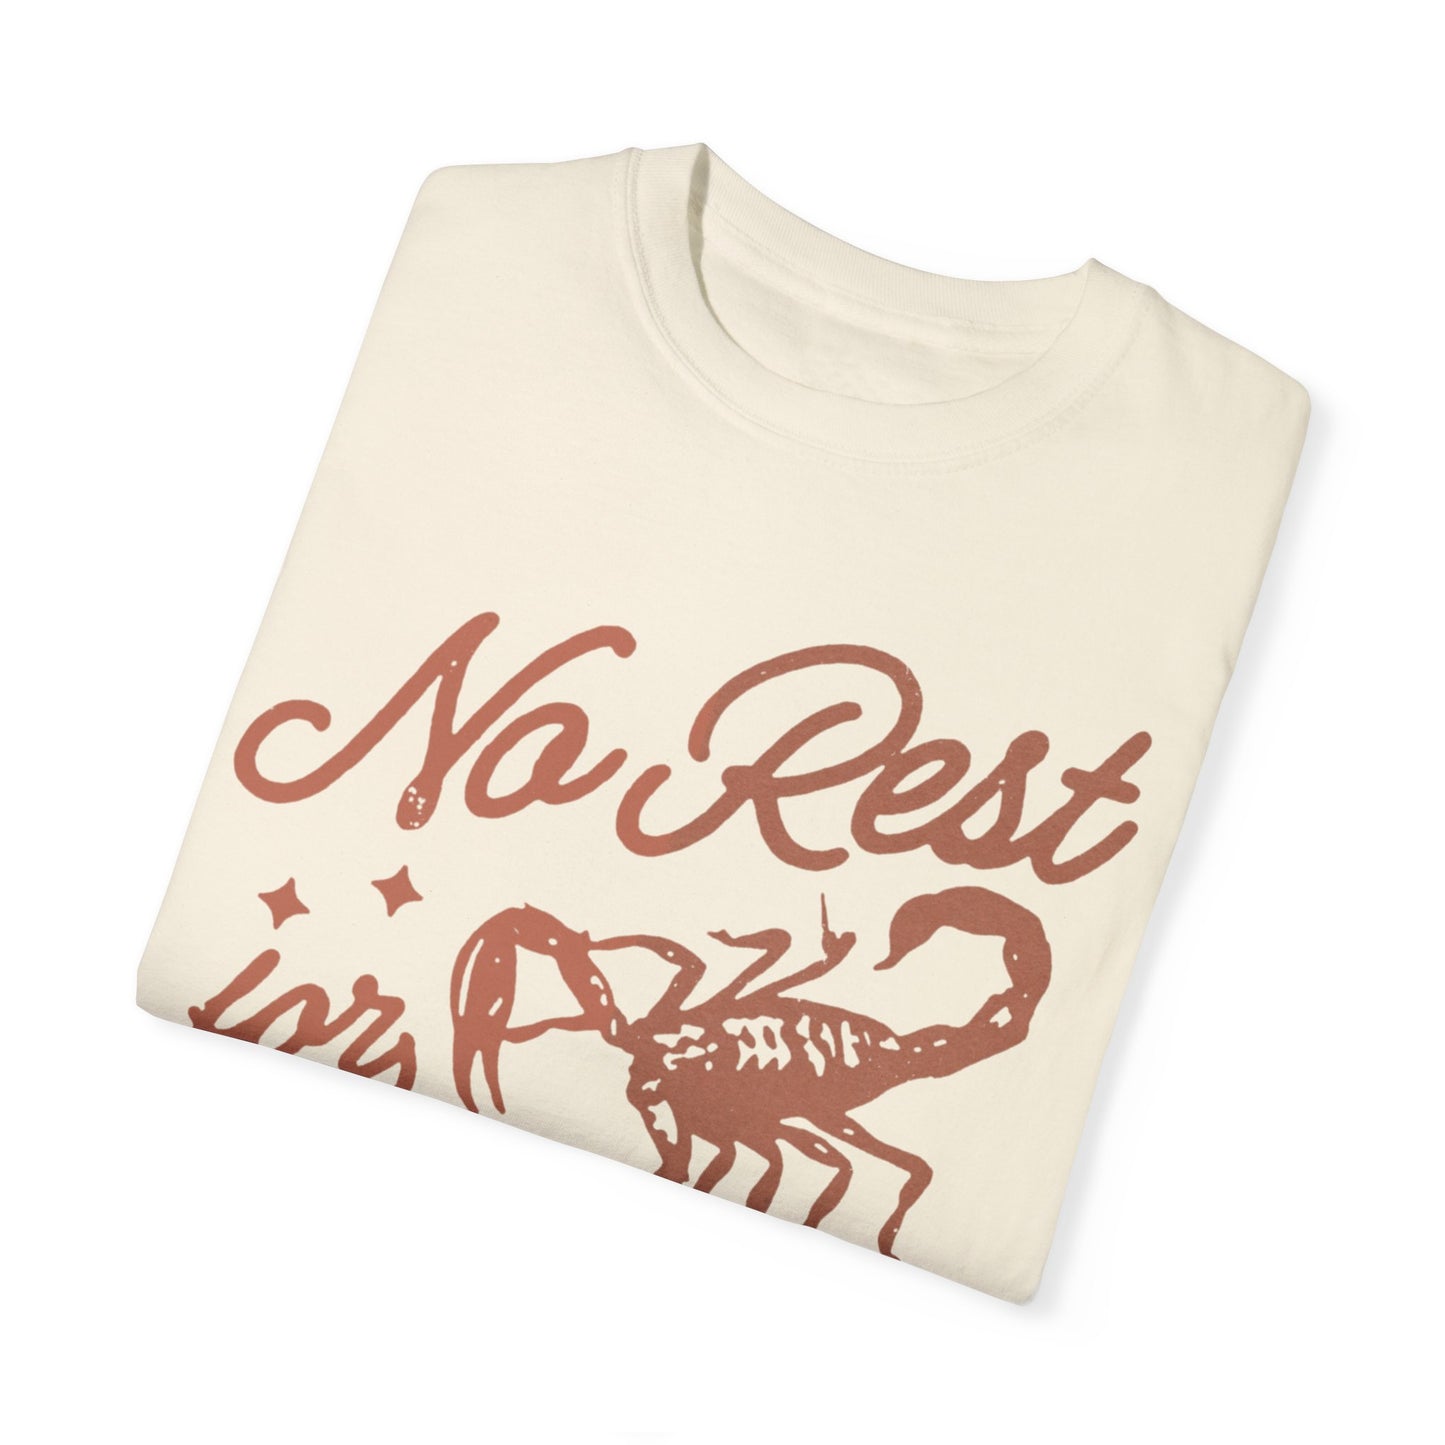 No Rest for the Wicked Tee